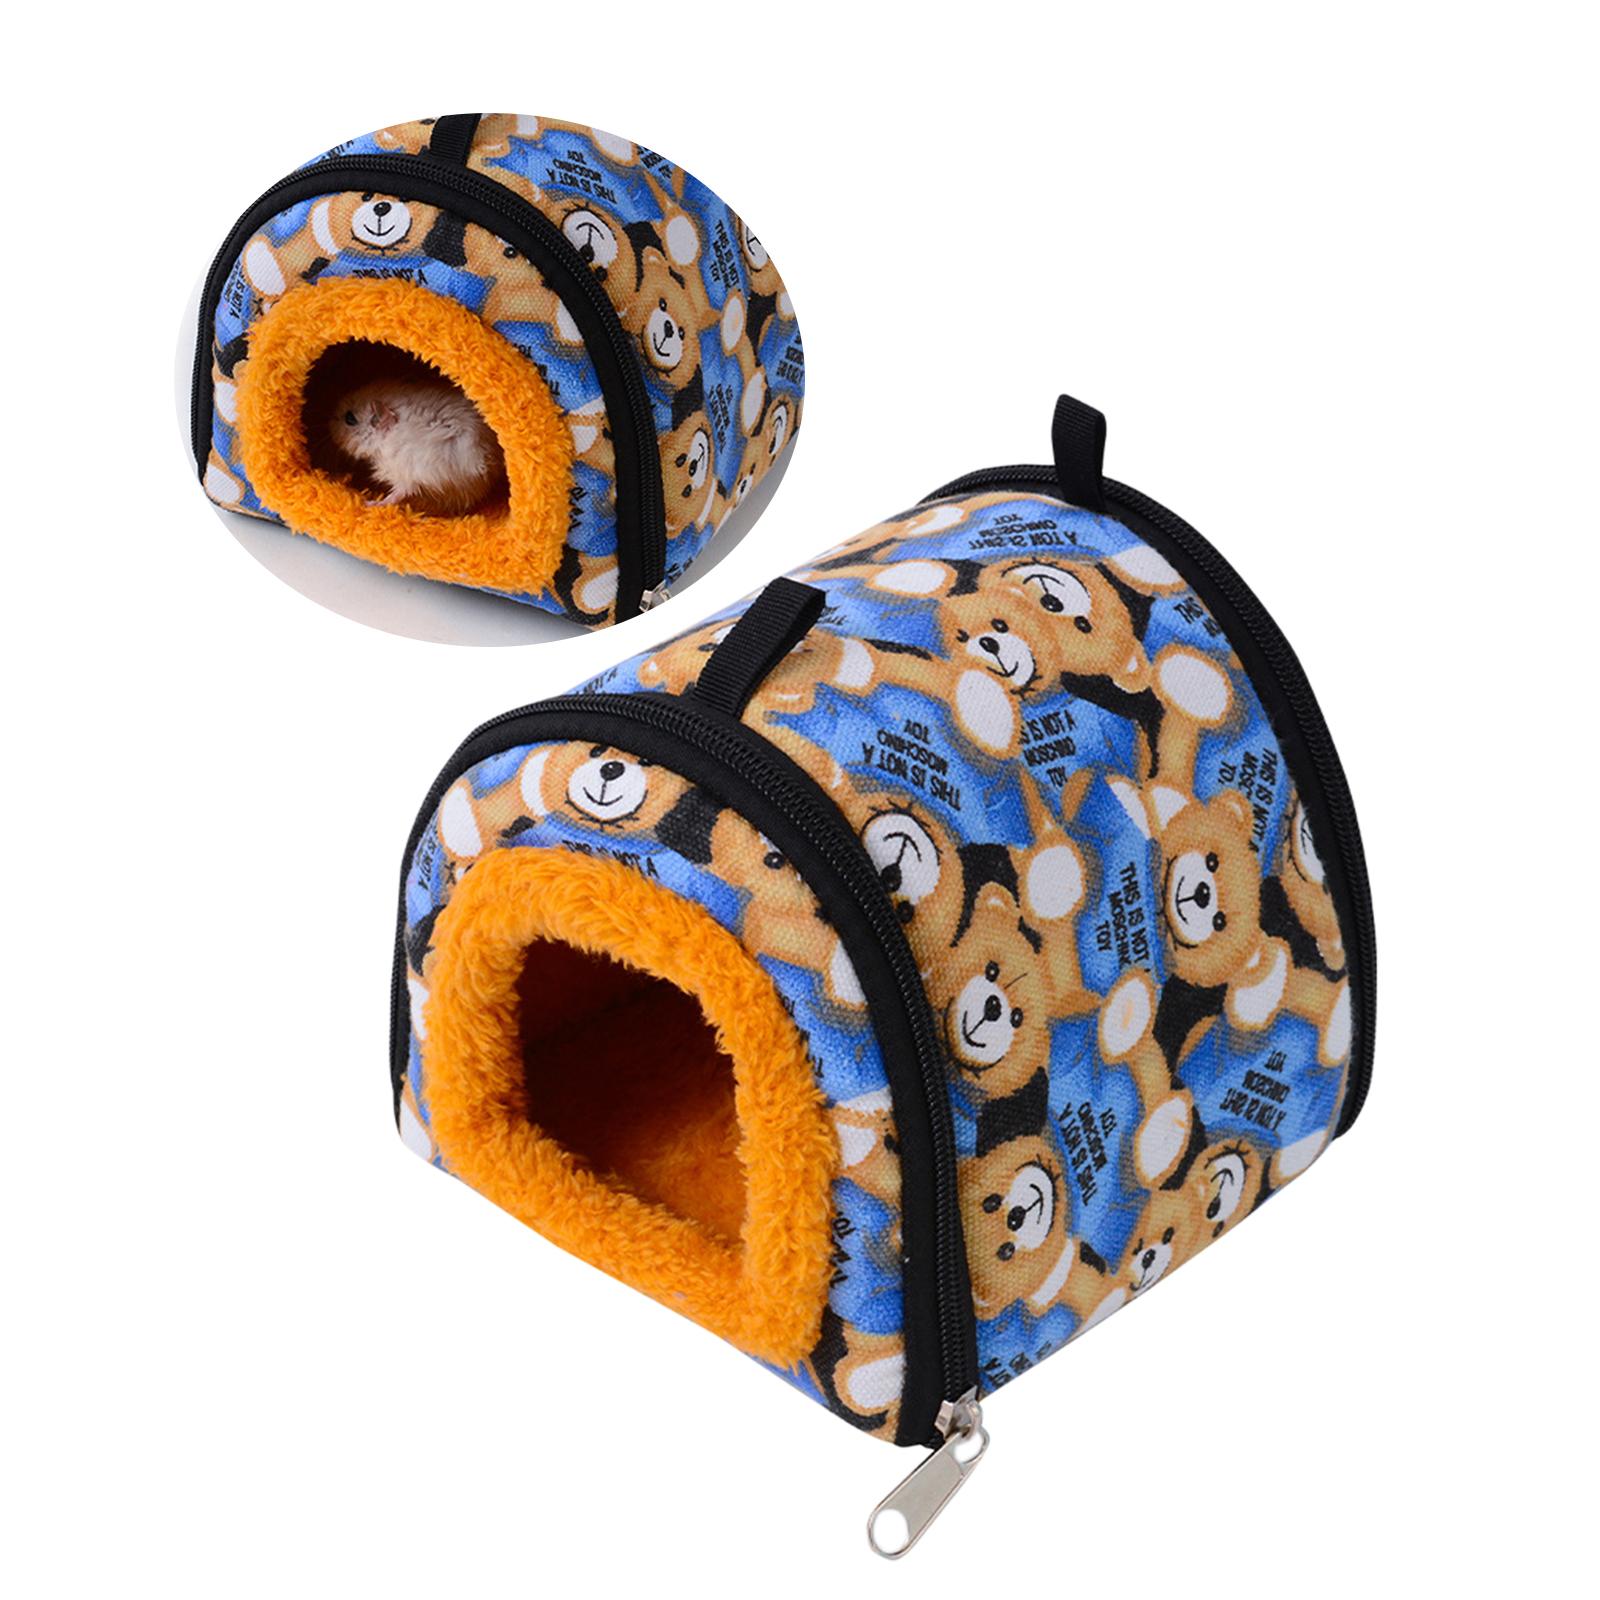 Guinea Pig Bed Nest Hamster House for Sugar Glider Rabbit Small Pet Supplies Blue Bear L